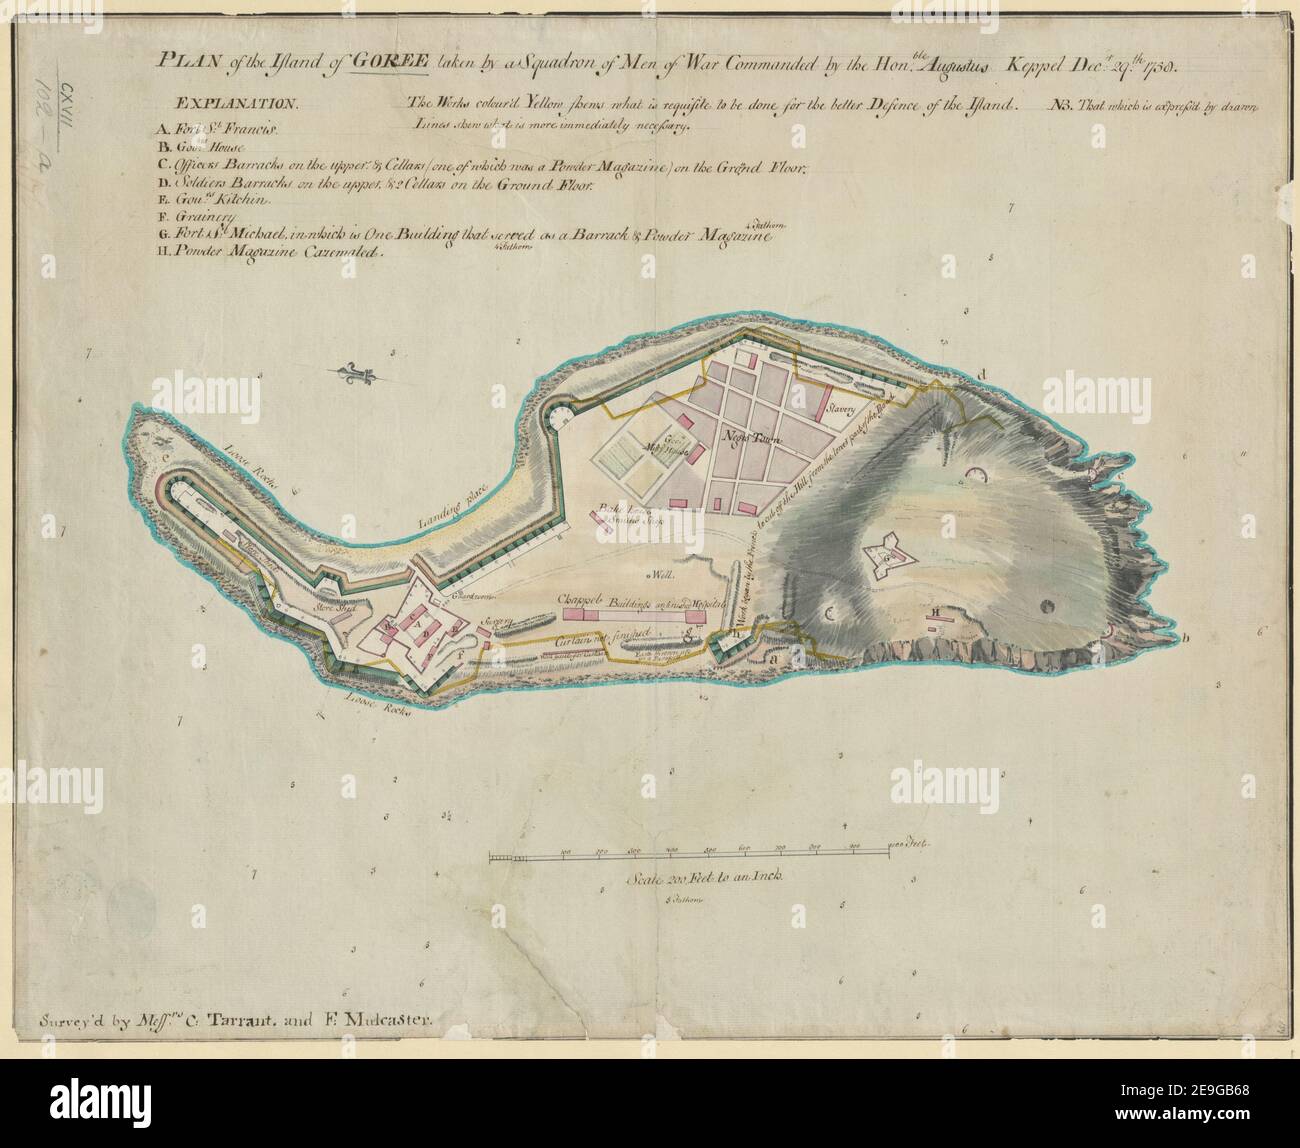 PLAN of the Island of Goree taken by a Squadron of Men of War Commanded by the Hon:ble Agustus Keppel Decr: 29.th 1758.  Author  Tarrant, Charles 117.102a. Place of publication: [GoreÃÅe] Publisher: [Charles Tarrant and Frederick G. Mulcaster] Date of publication: [between 1758 and 1763.]  Item type: 1 map Medium: ink and watercolour over pencil Dimensions: 36 x 45 cm  Former owner: George III, King of Great Britain, 1738-1820 Stock Photo